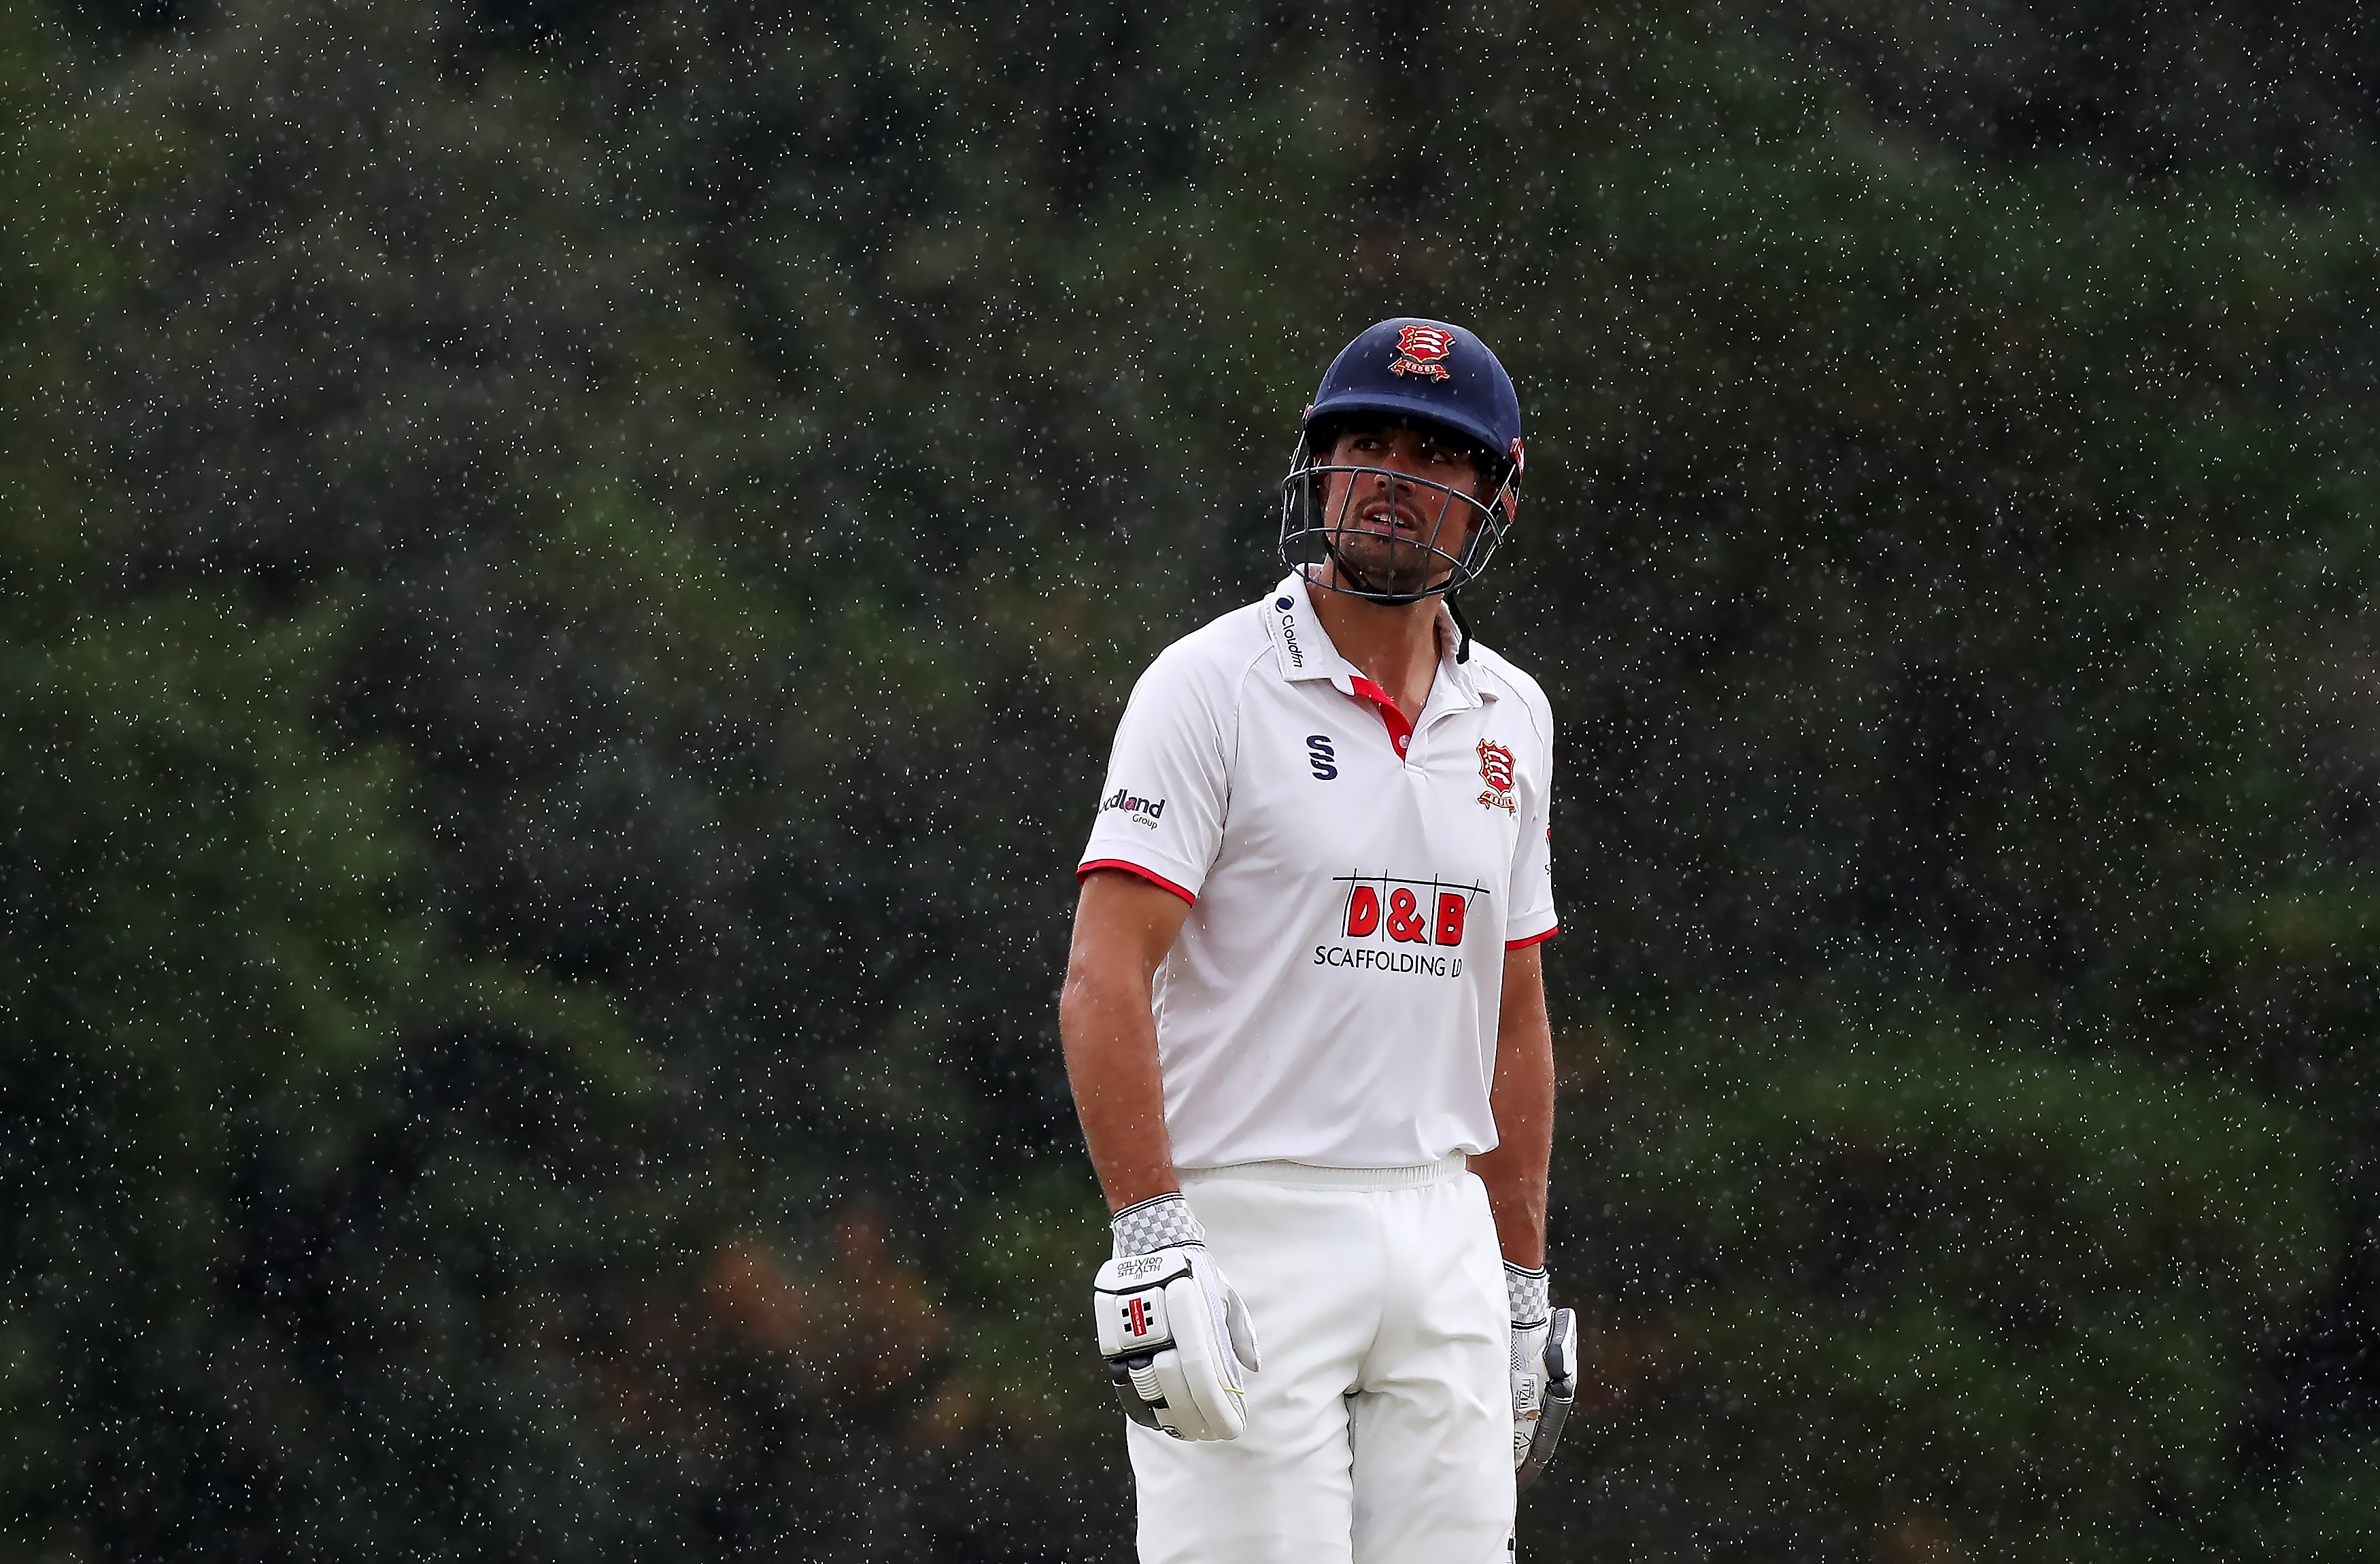 Alastair Cook of Essex looks skywards as the rain starts to fall again during Hampshire vs Essex in the Bob Willis Trophy at Arundel Castle Cricket Club on 23 August.